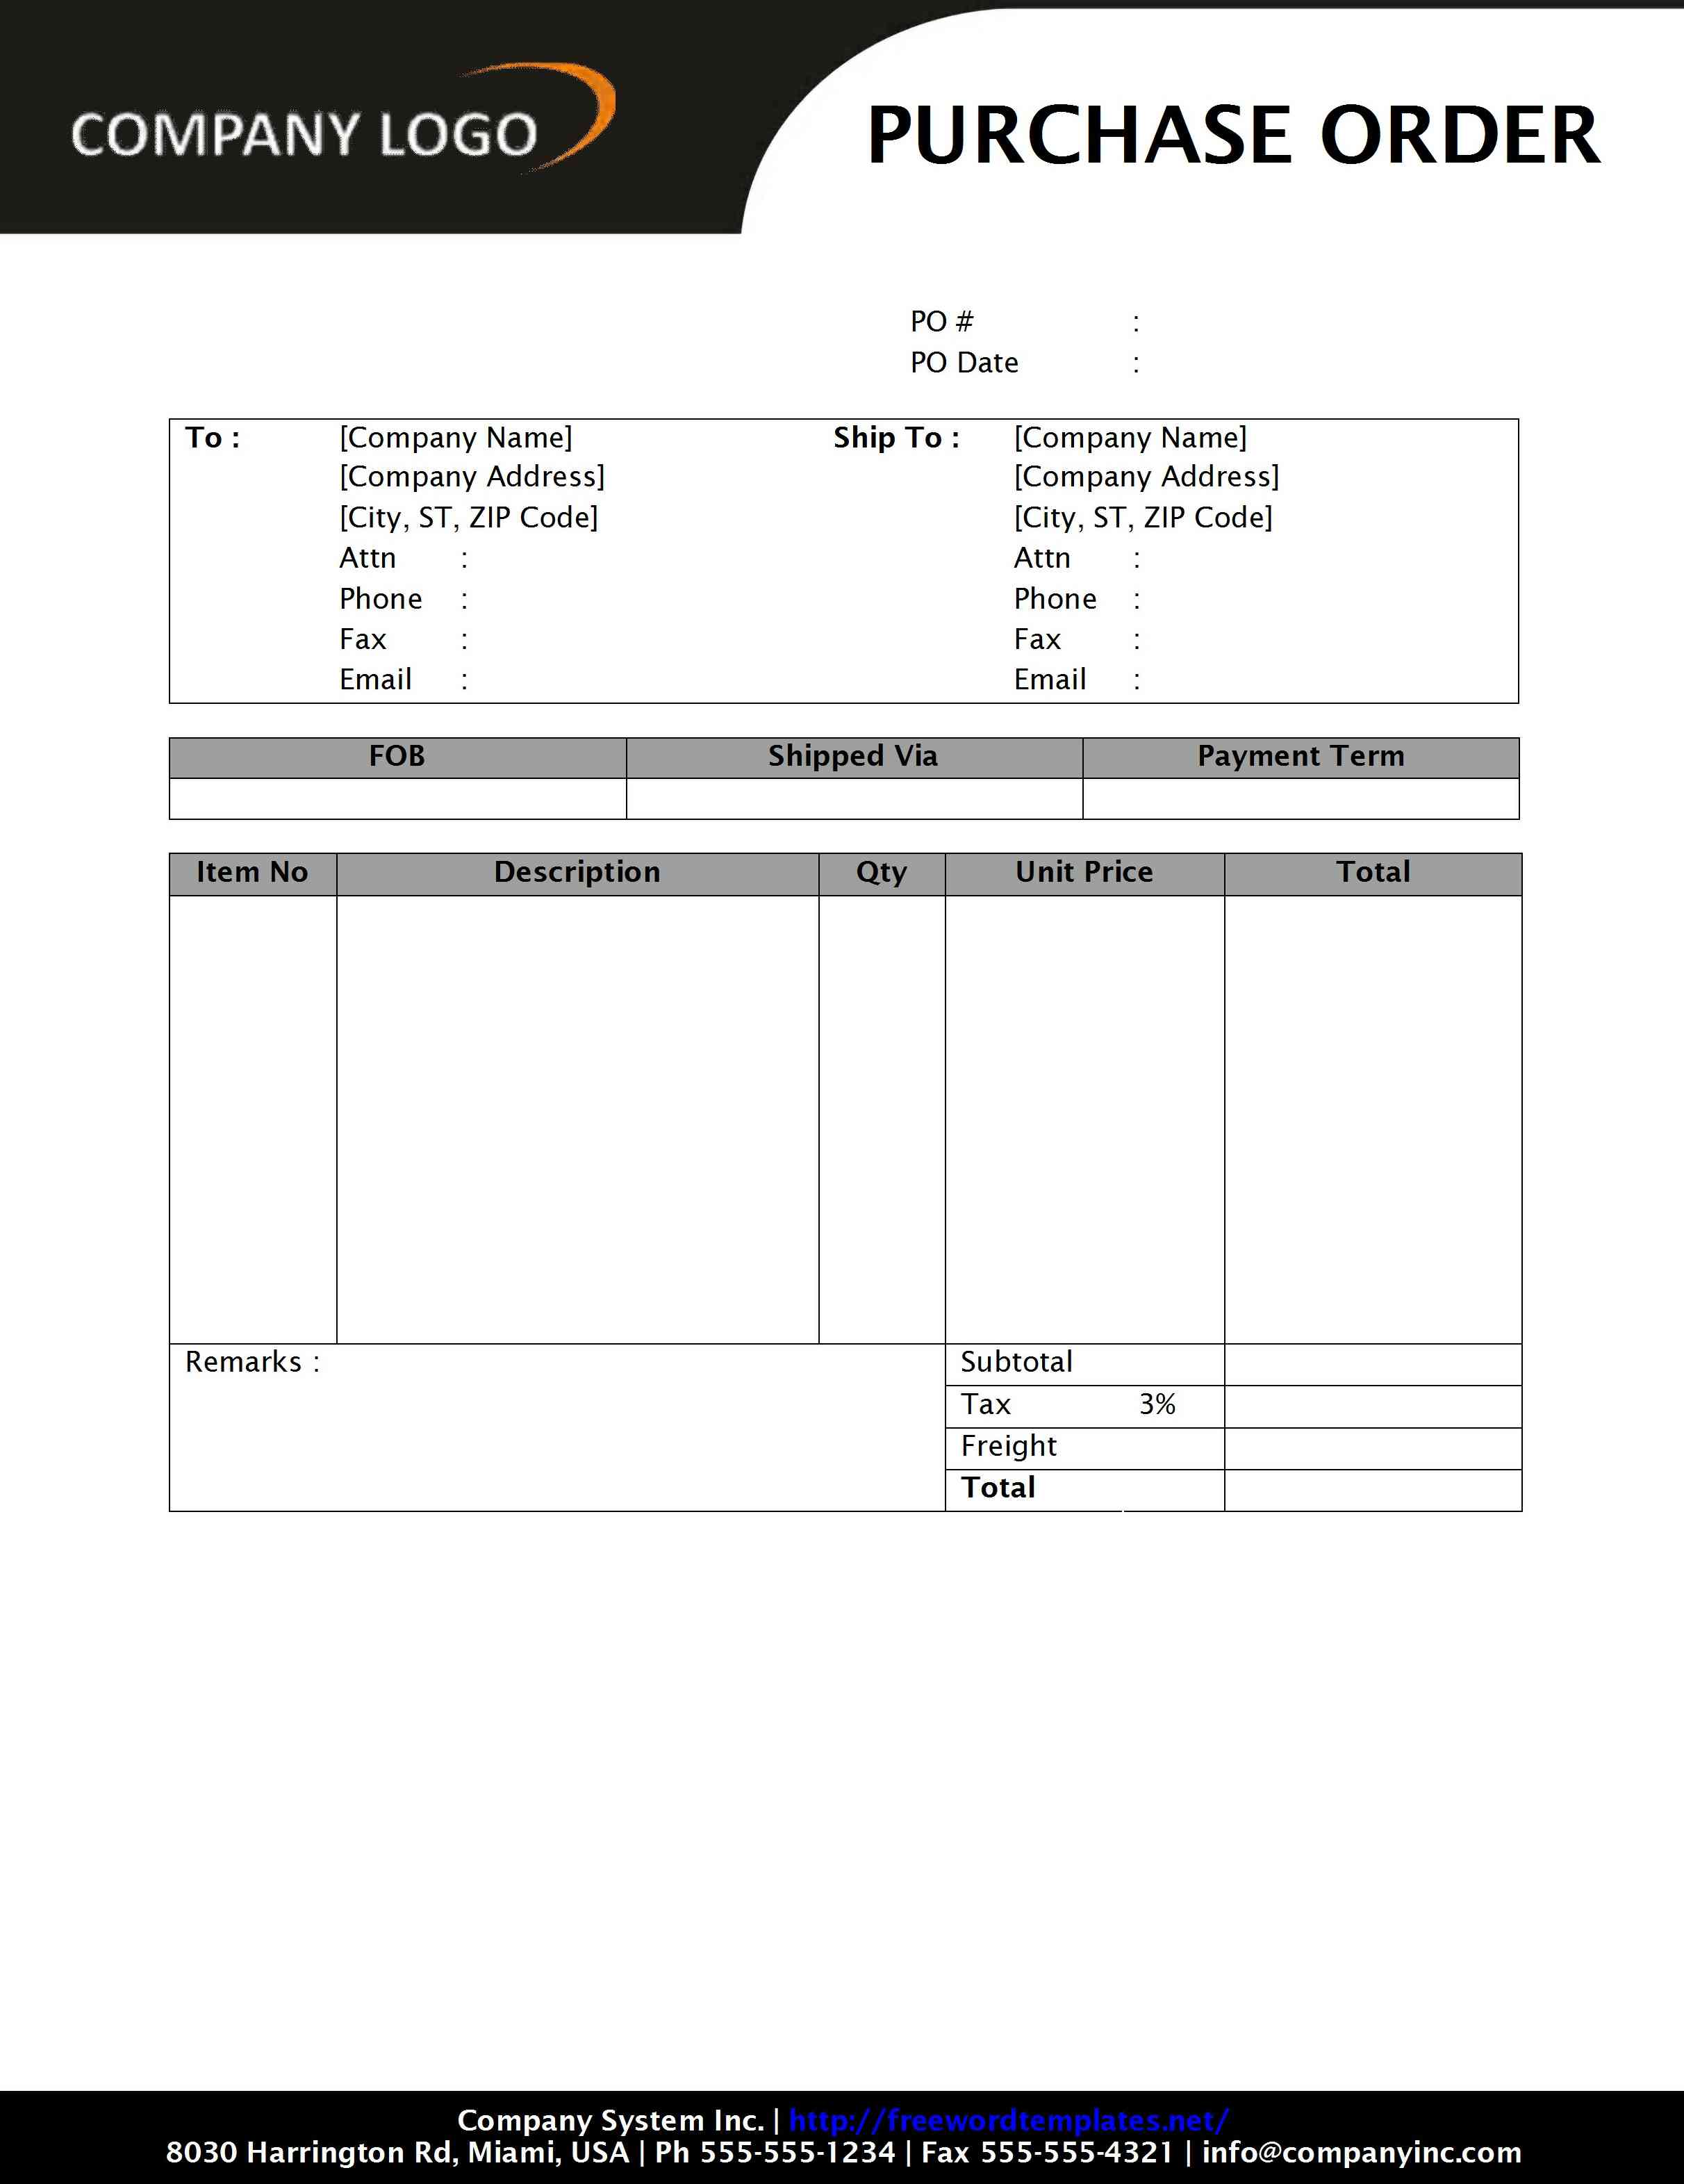 3 Part Fuel Purchase Order Book | Business Forms Pinterest 